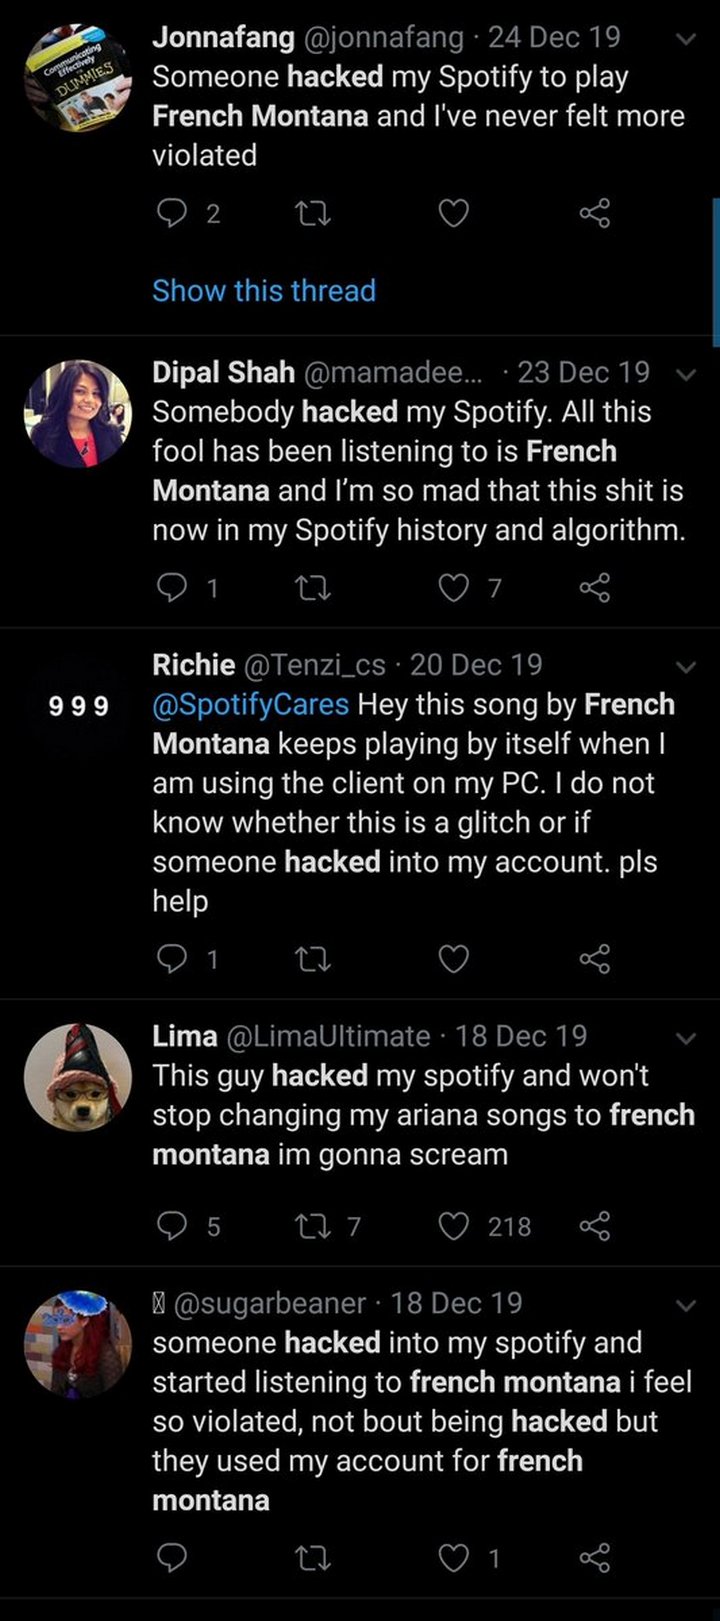 More complaints about French Montana's song playing on loop